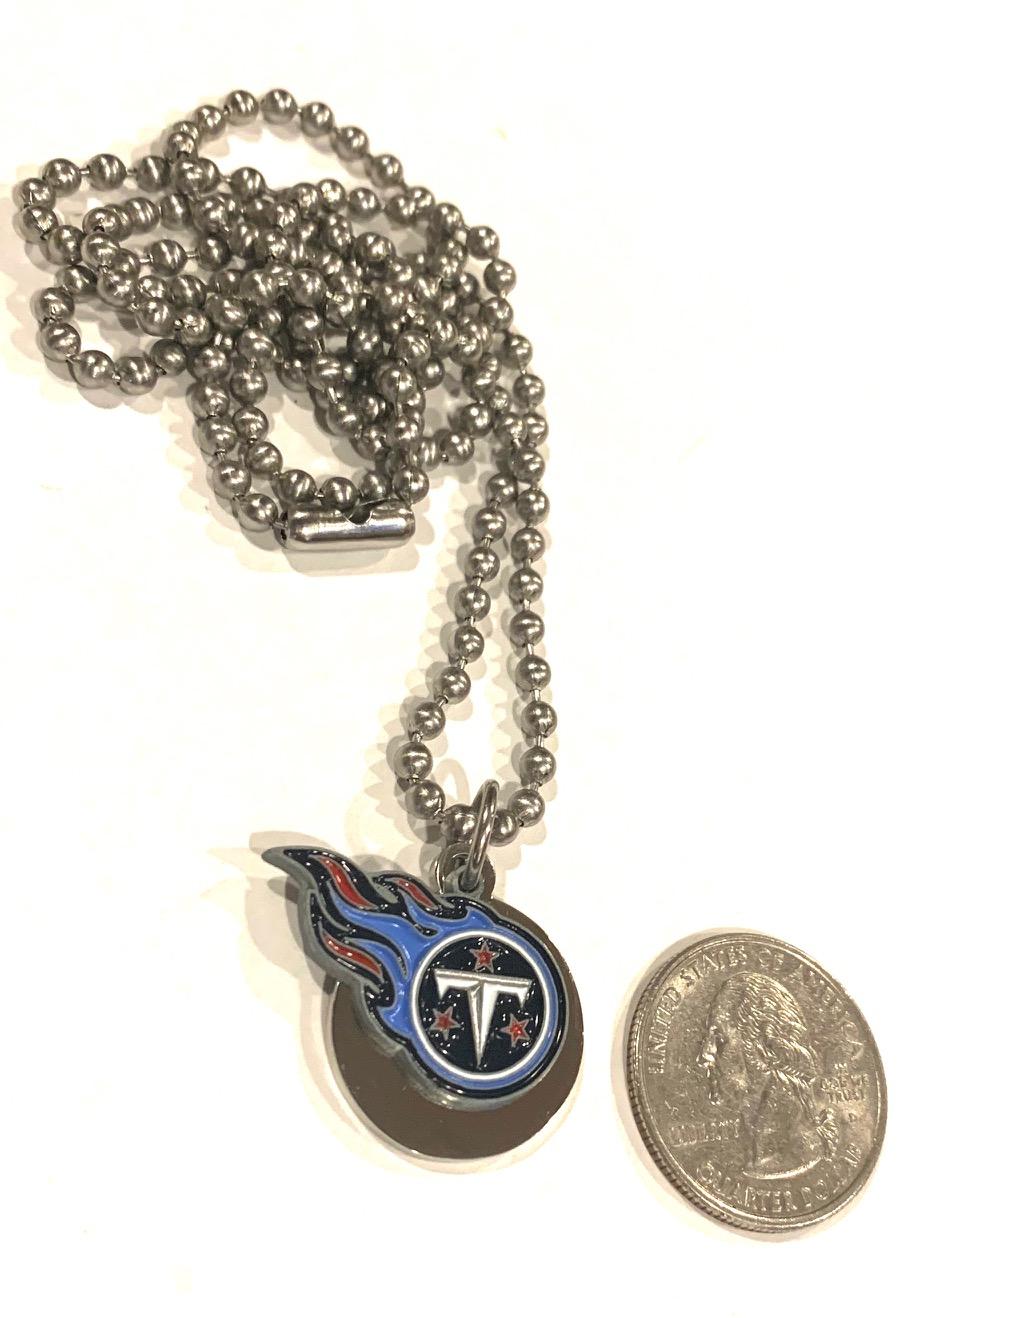 Tennesee Titans round small NFL stainless steel dog tag necklace ball chain pendant - Samstagsandmore